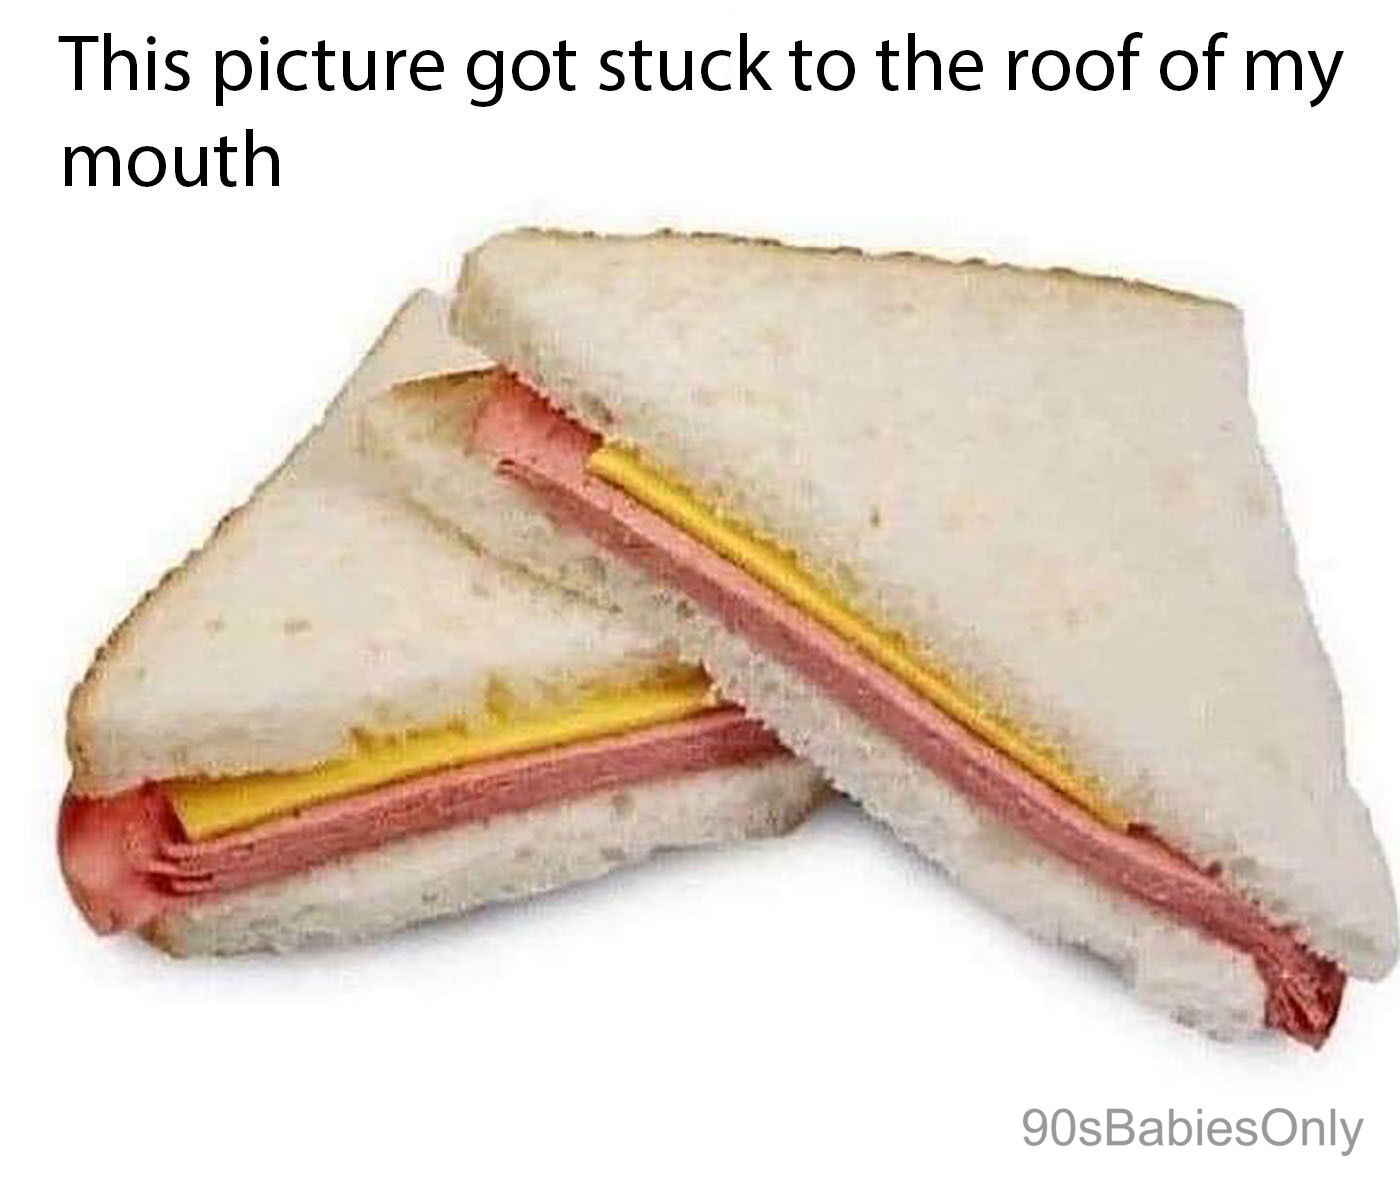 A very basic sandwich with meat and cheese slices on white bread.

Text above image: This picture got stuck to the roof of my mouth 